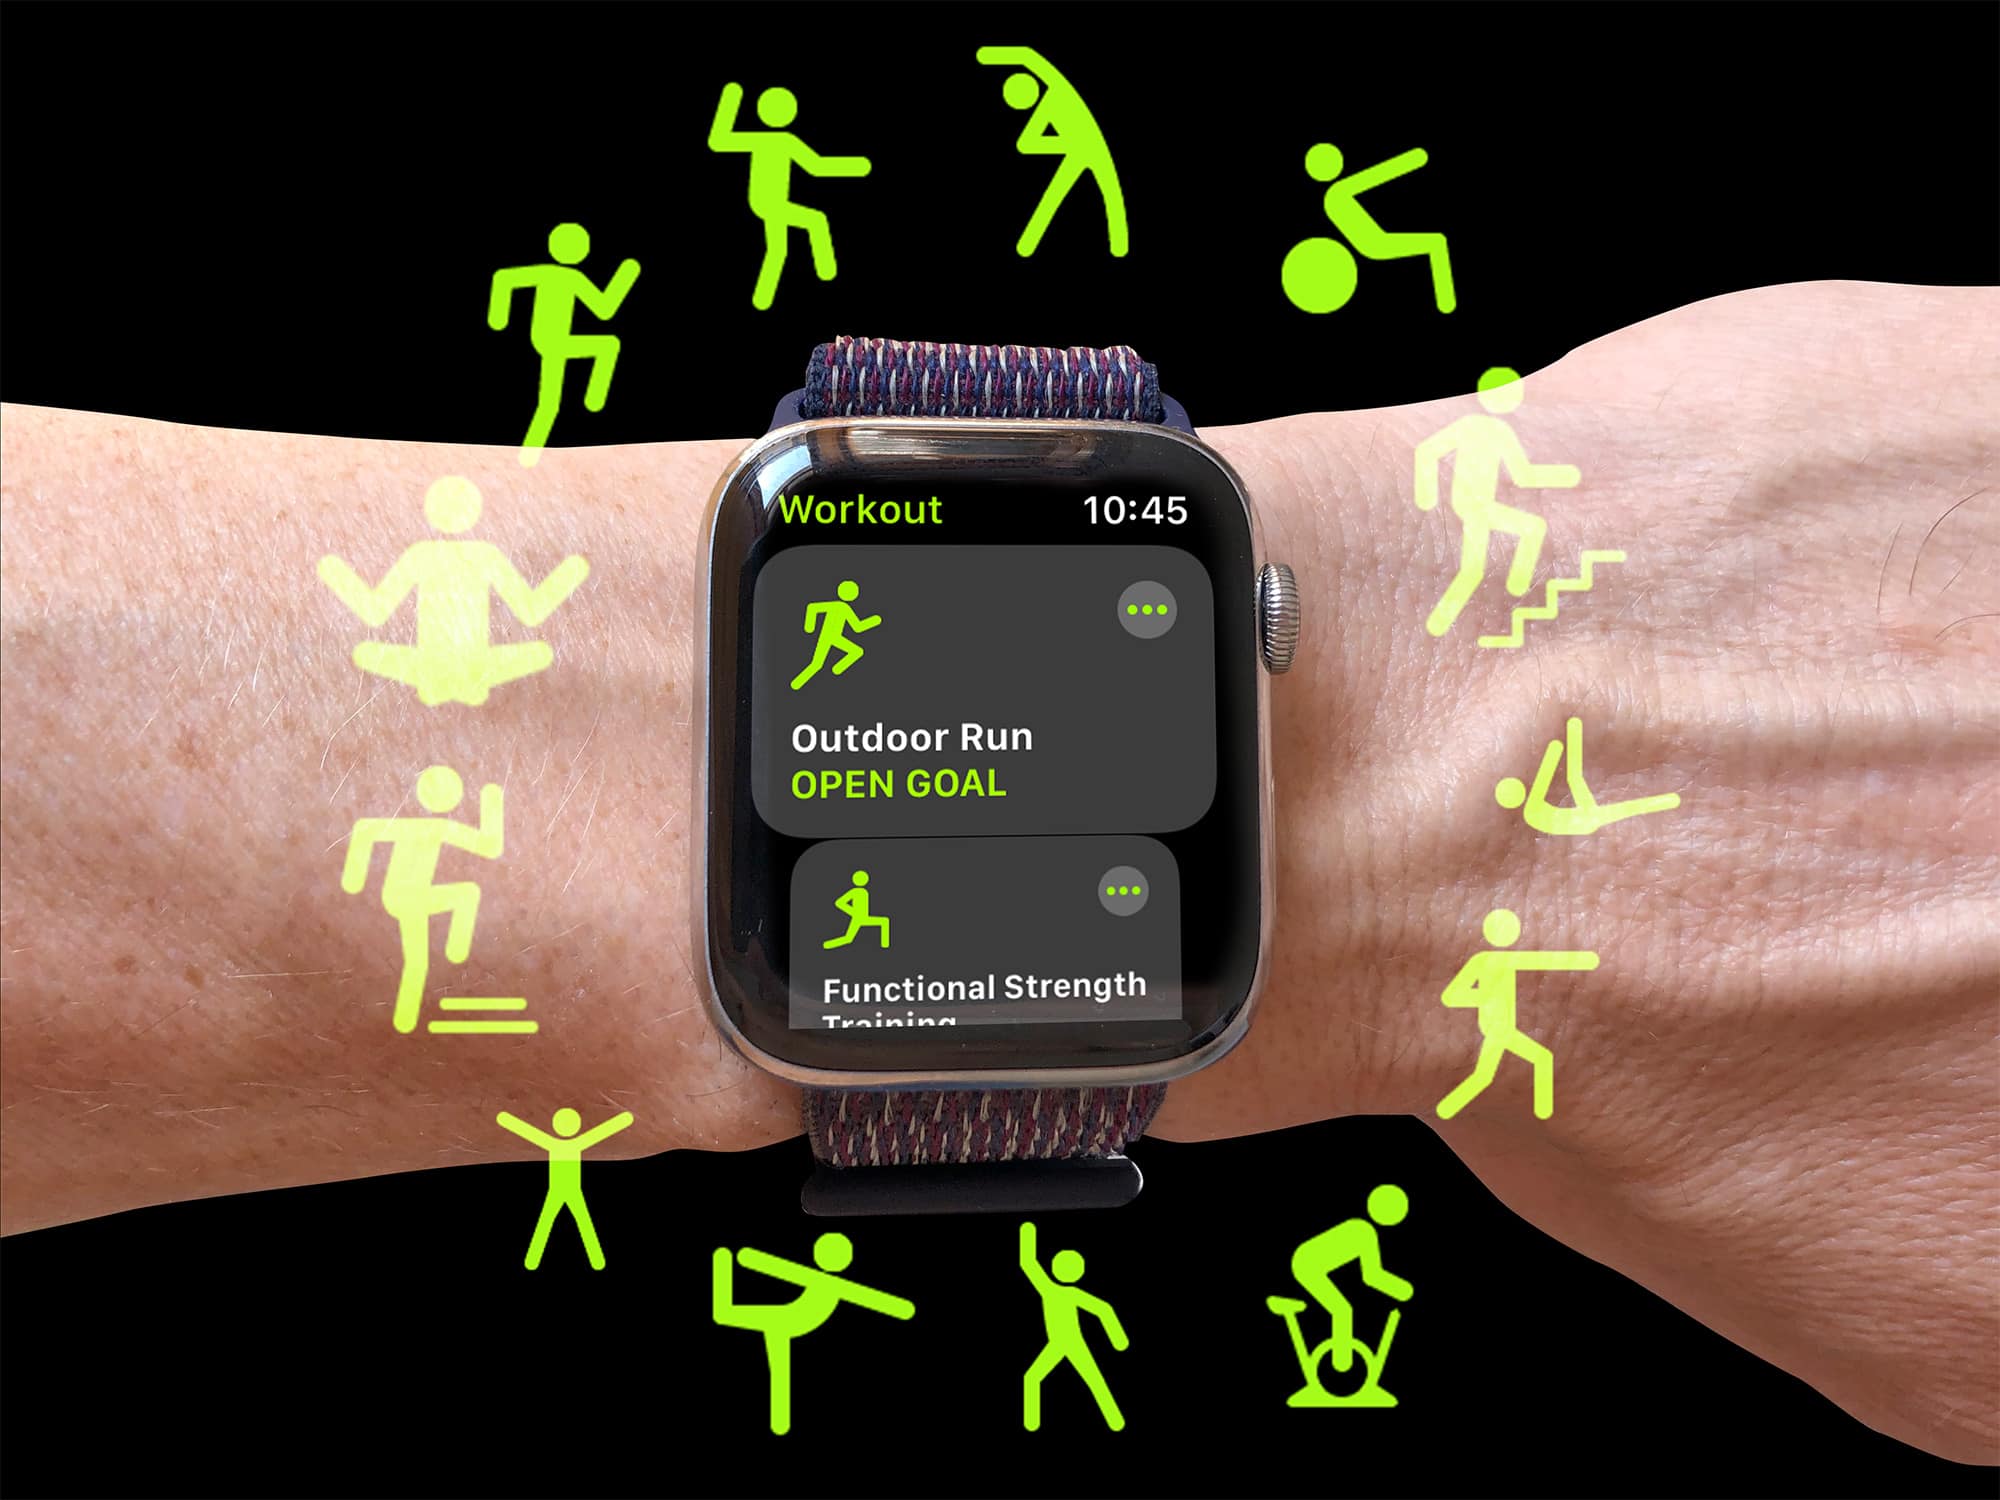 How to Delete a Workout on Apple Watch